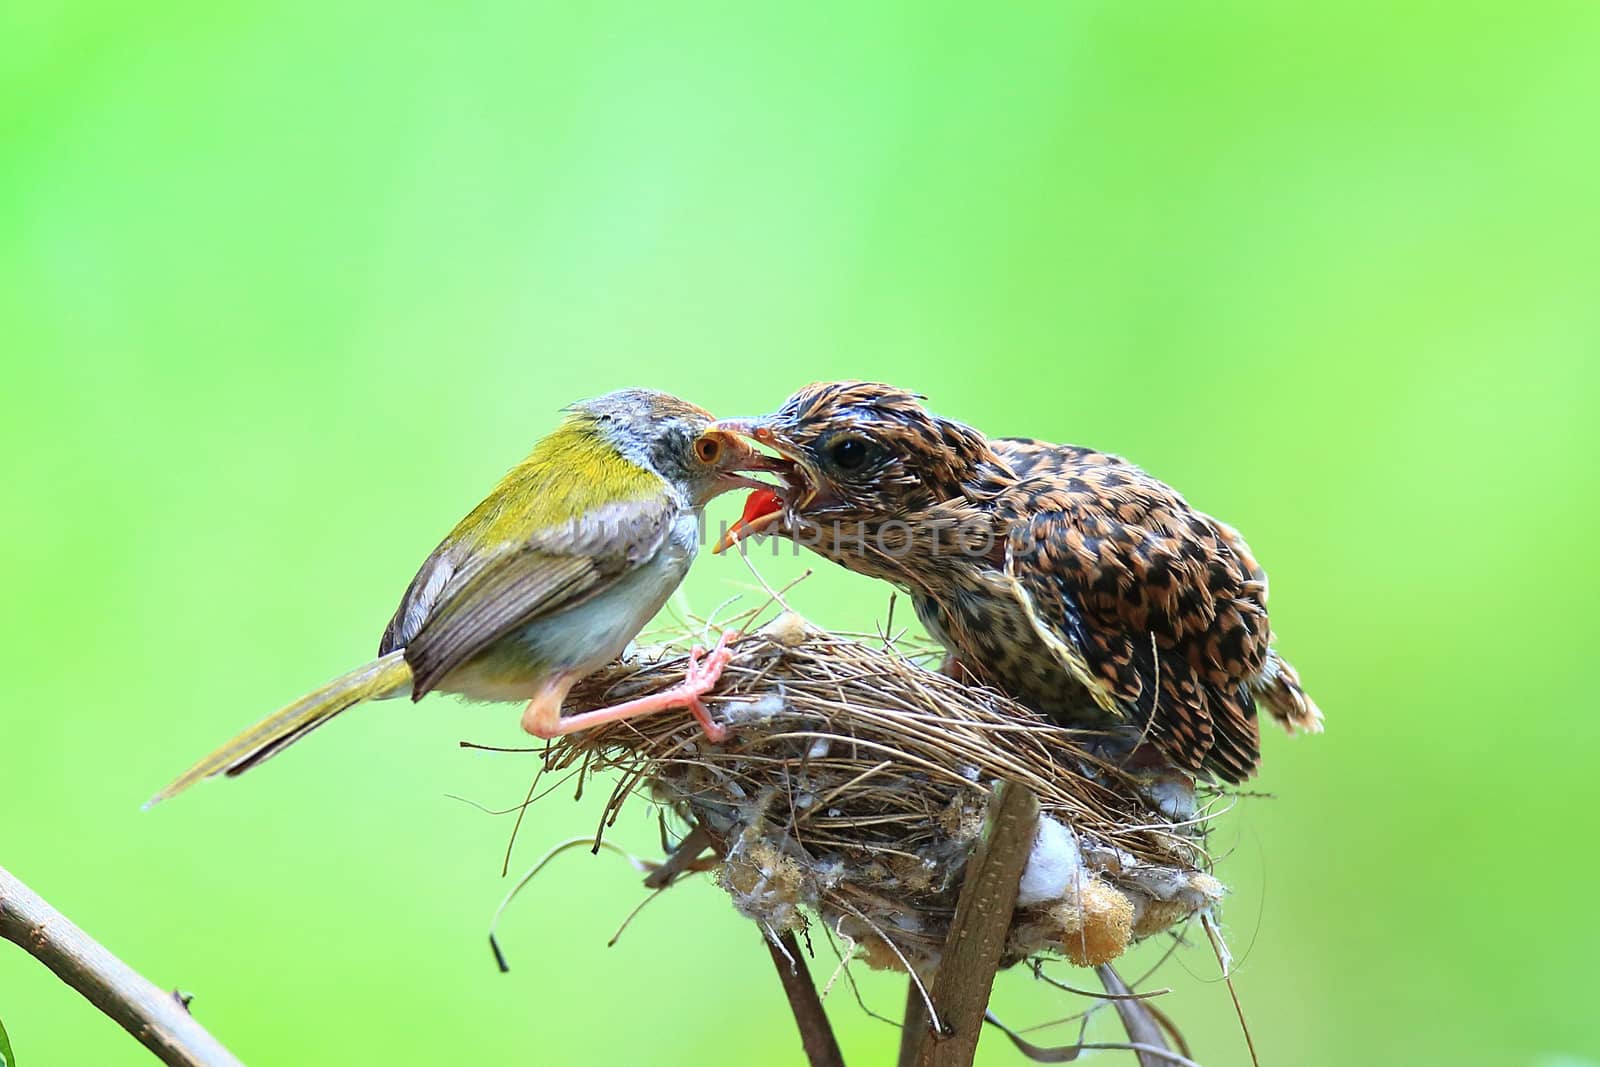 Female Cardinal feeds her baby chicks while standing on their bi by jee1999